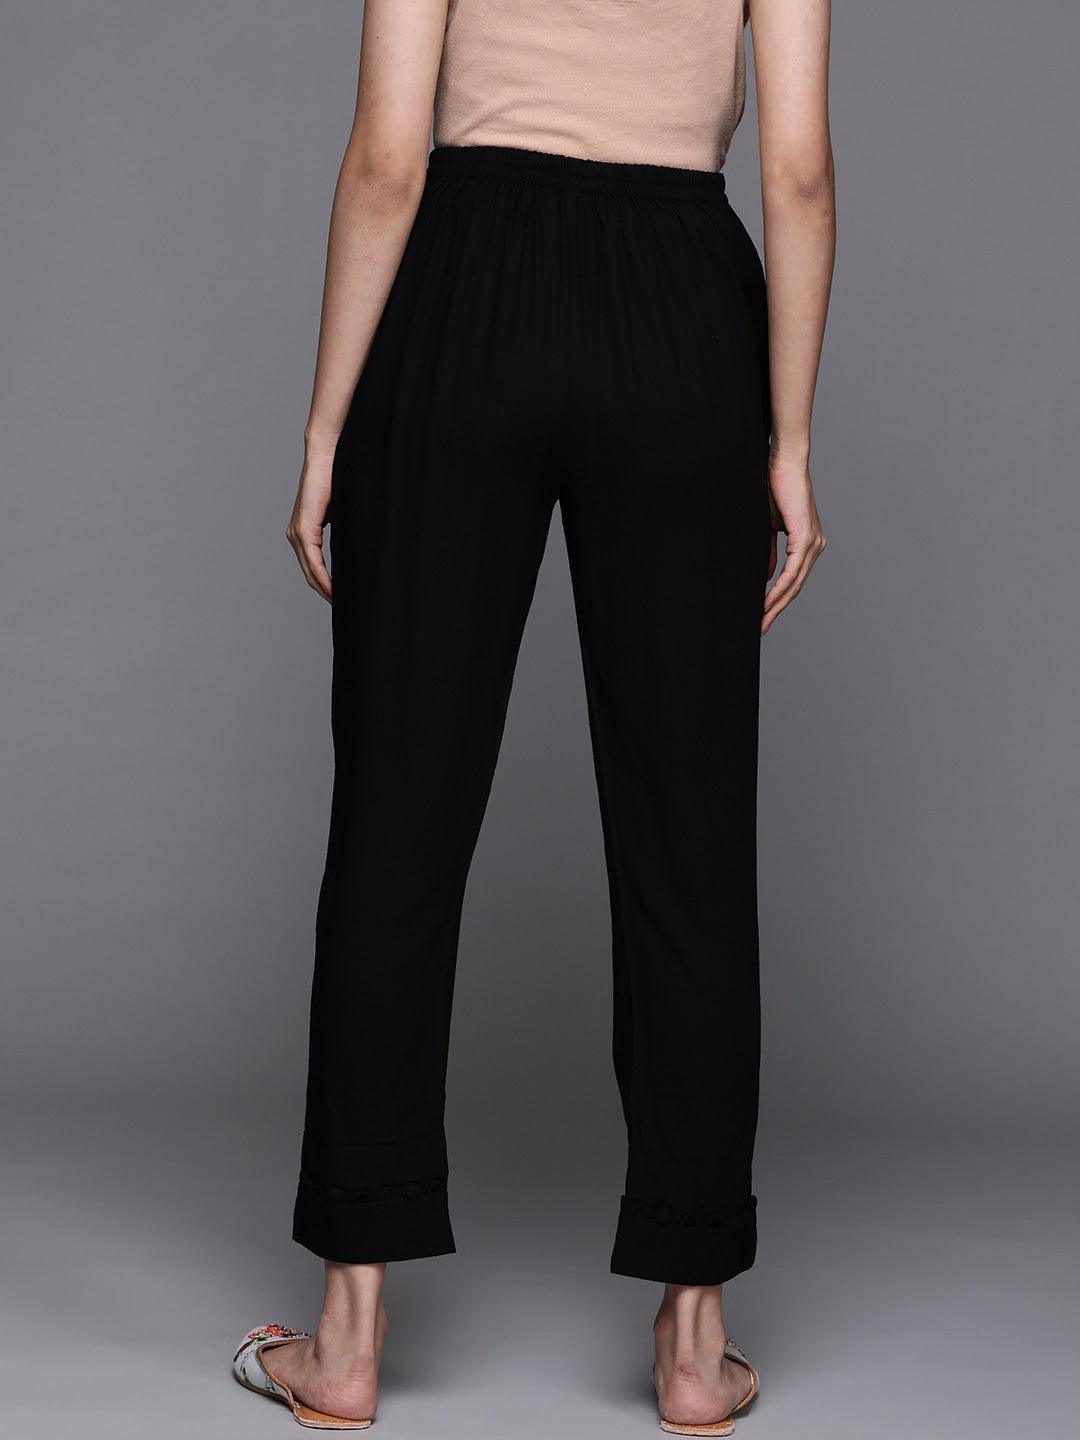 Black Solid Rayon Trousers - Libas